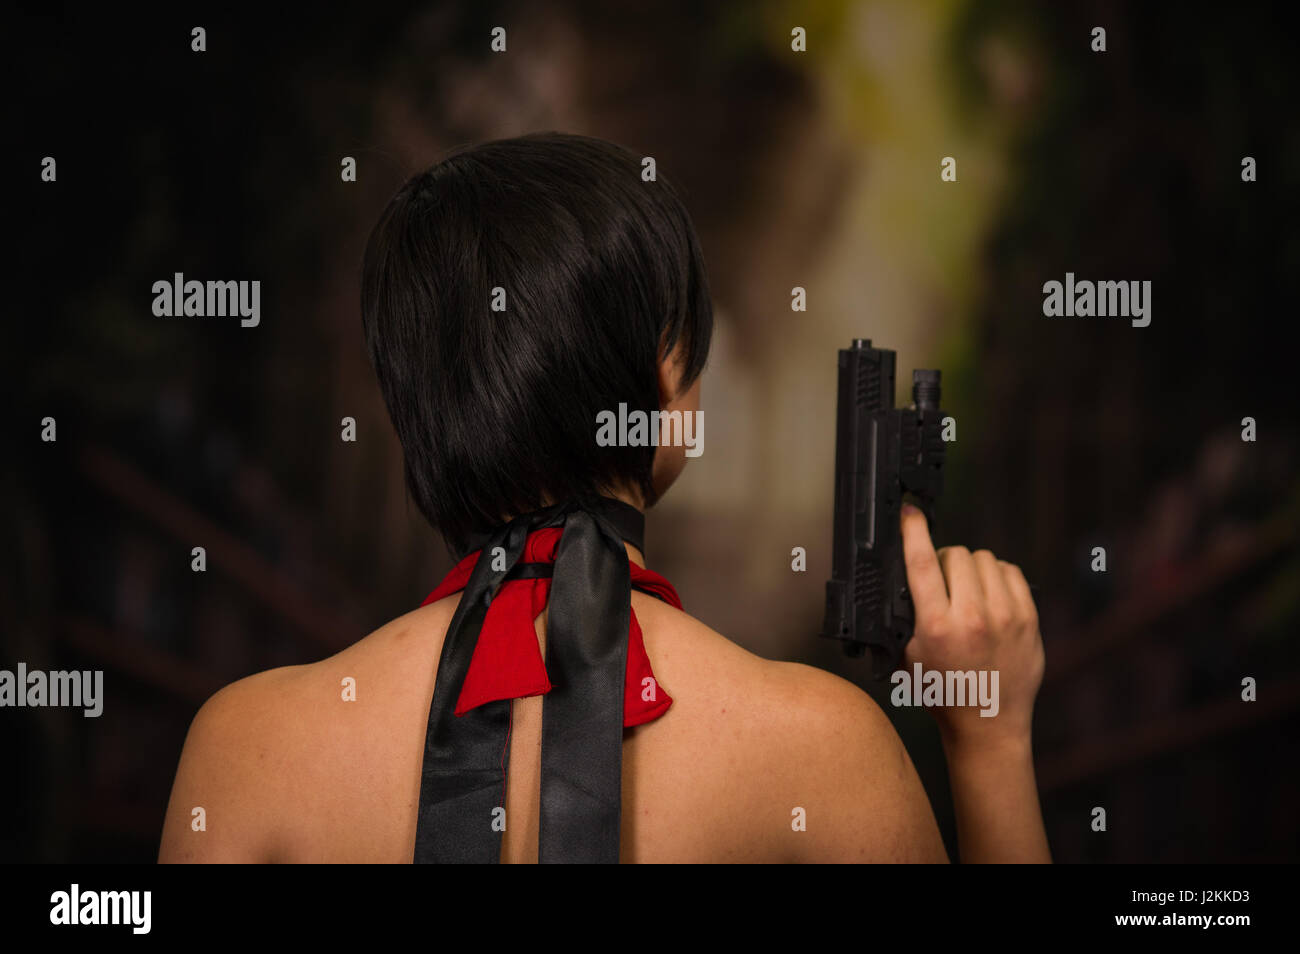 Powerful Woman Holding Gun, resident evil cosplay costume, back side Stock Photo